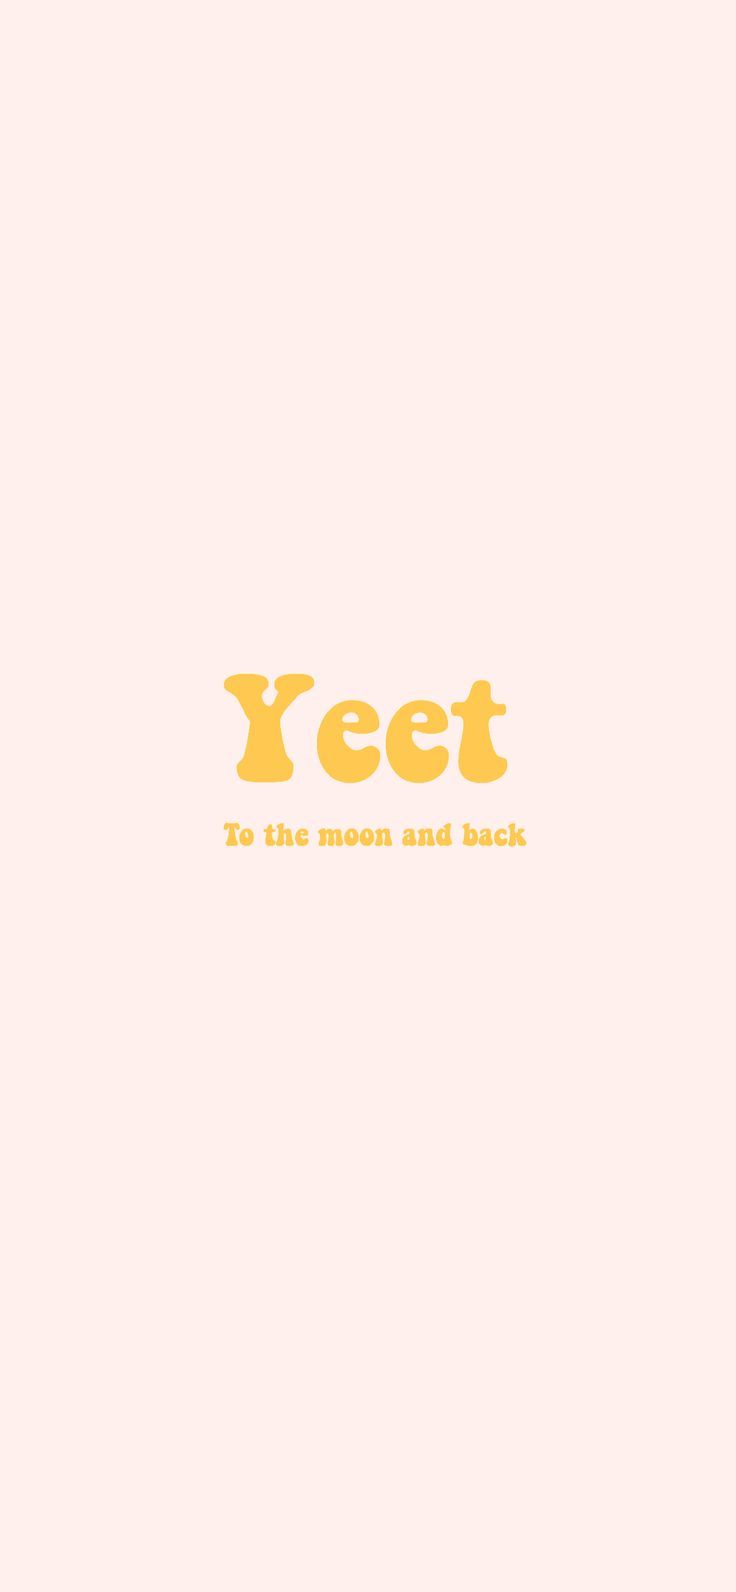 Pink Yeet Wallpaper Works For All Sizes Of Phones iPhone X